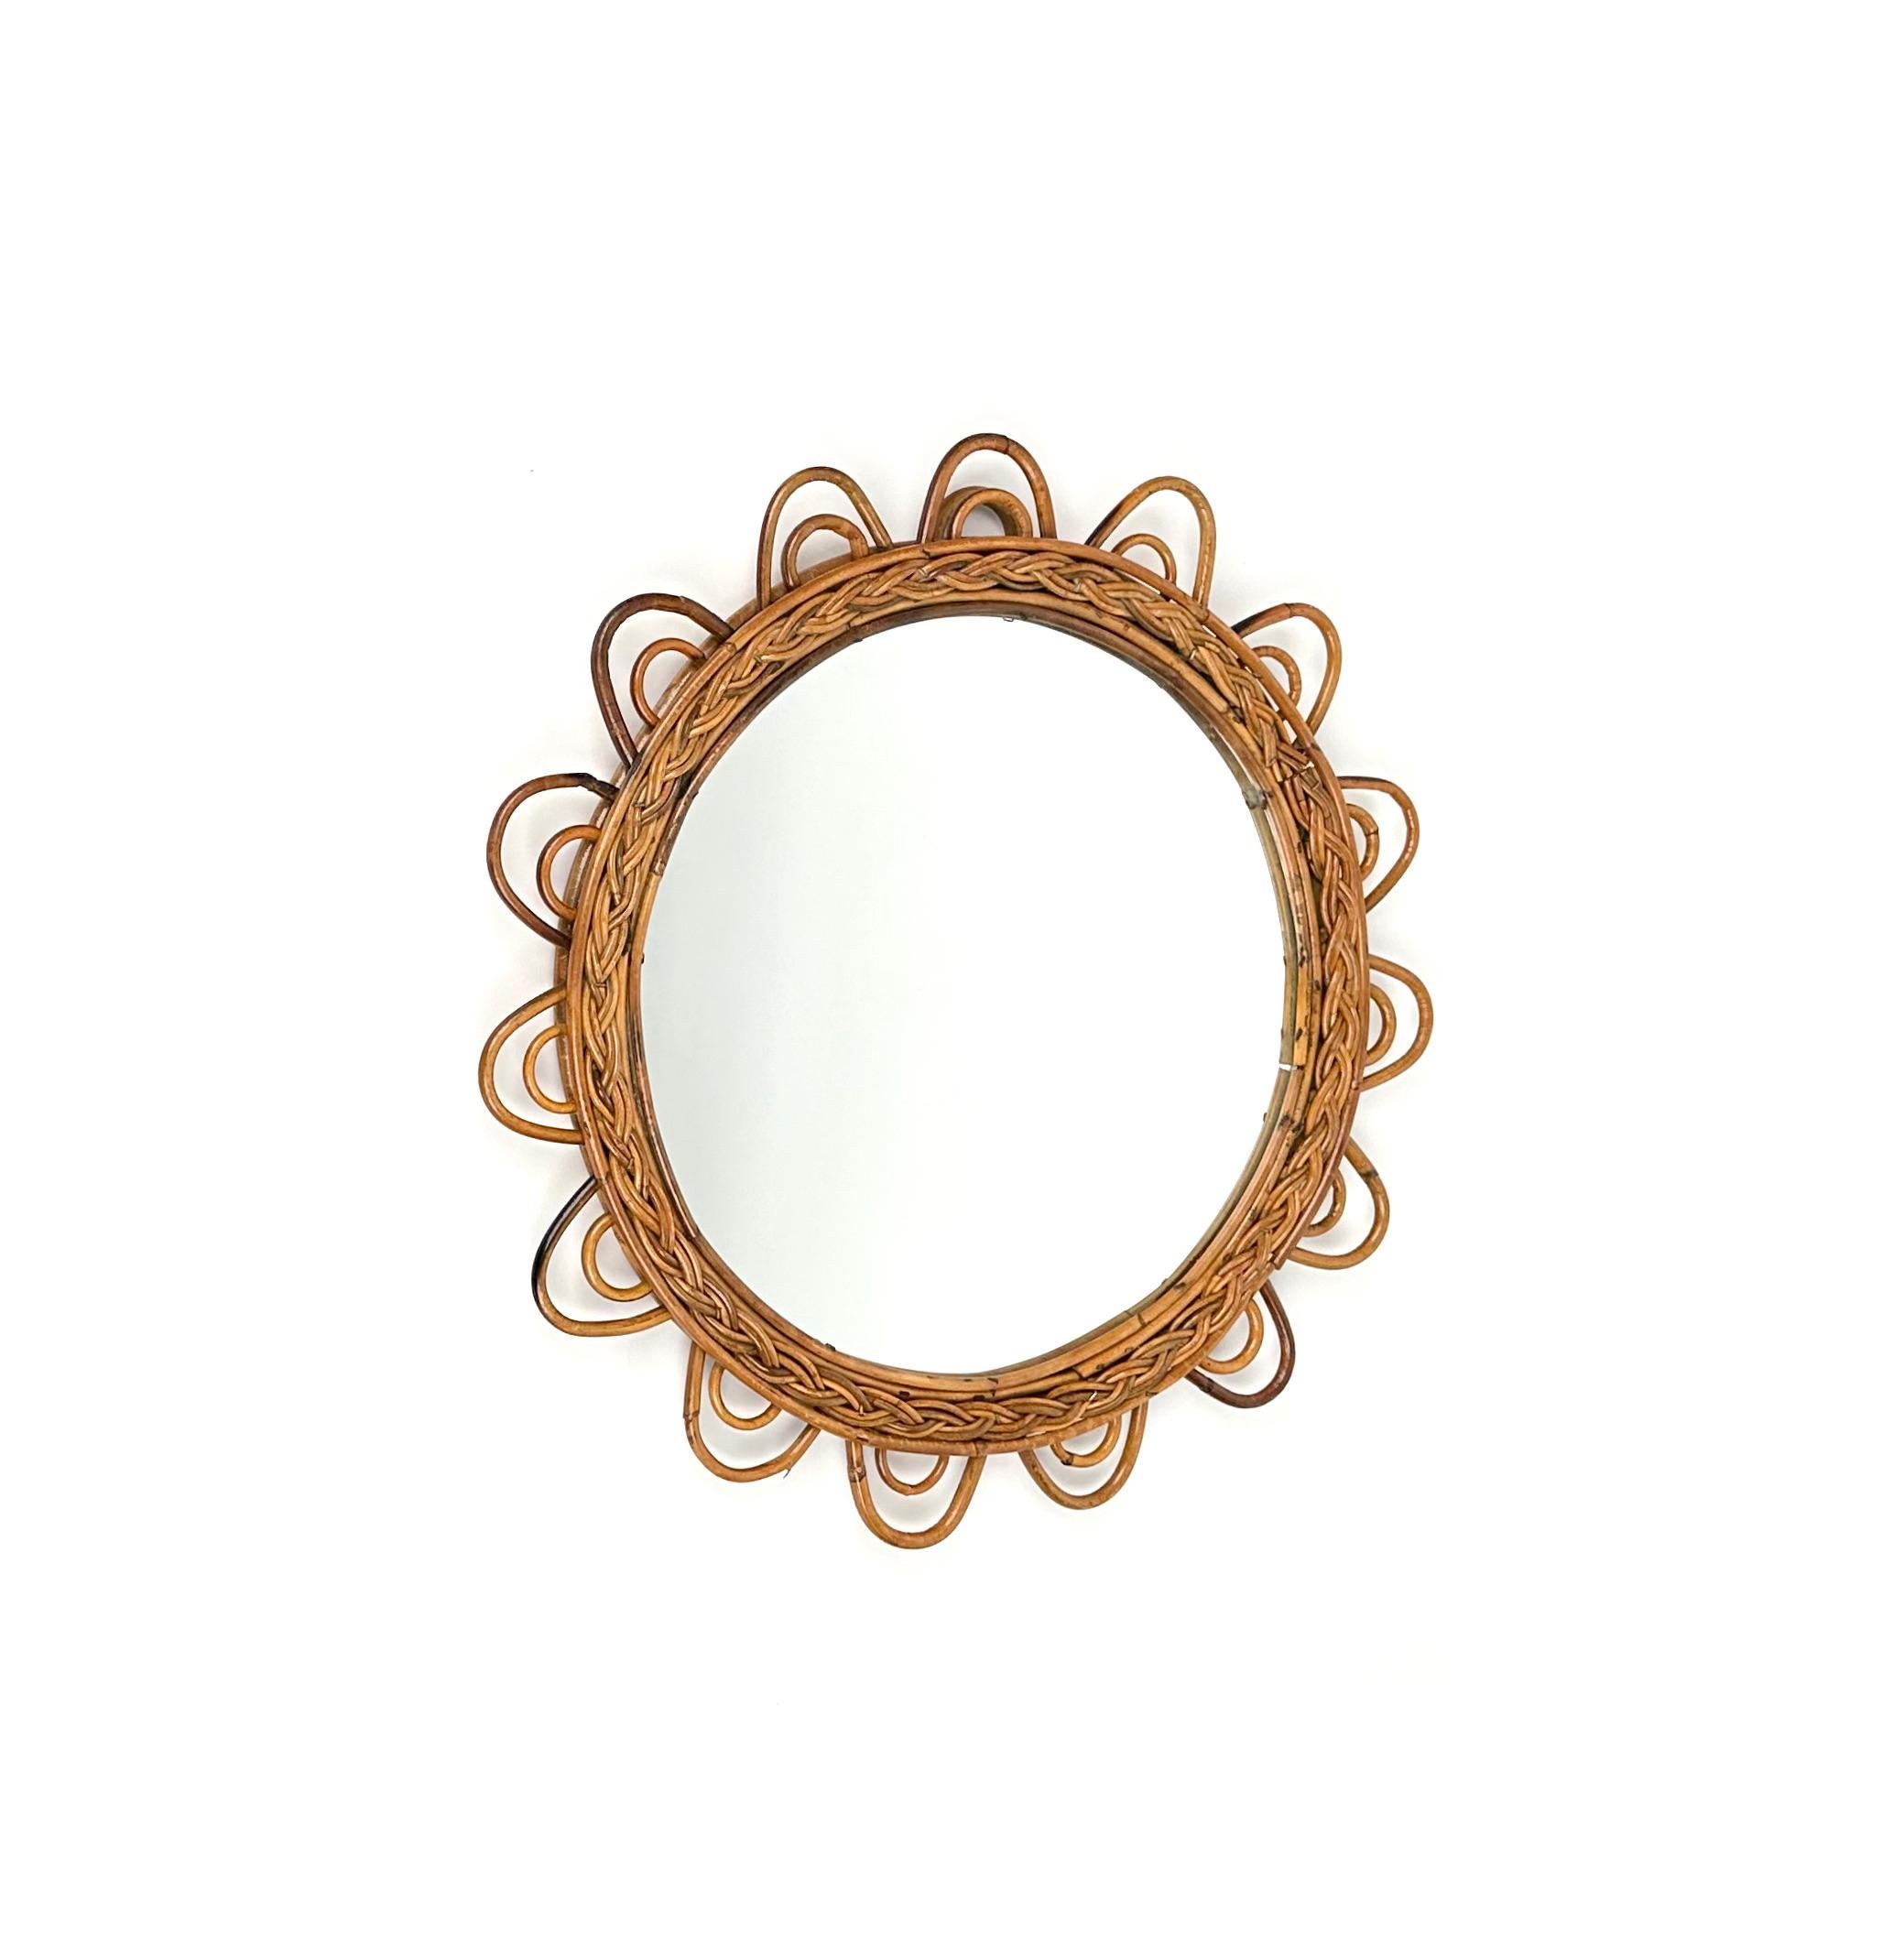 Beautiful rattan sunburst flower shaped wall mirror.

Made in Italy in the 1960s.